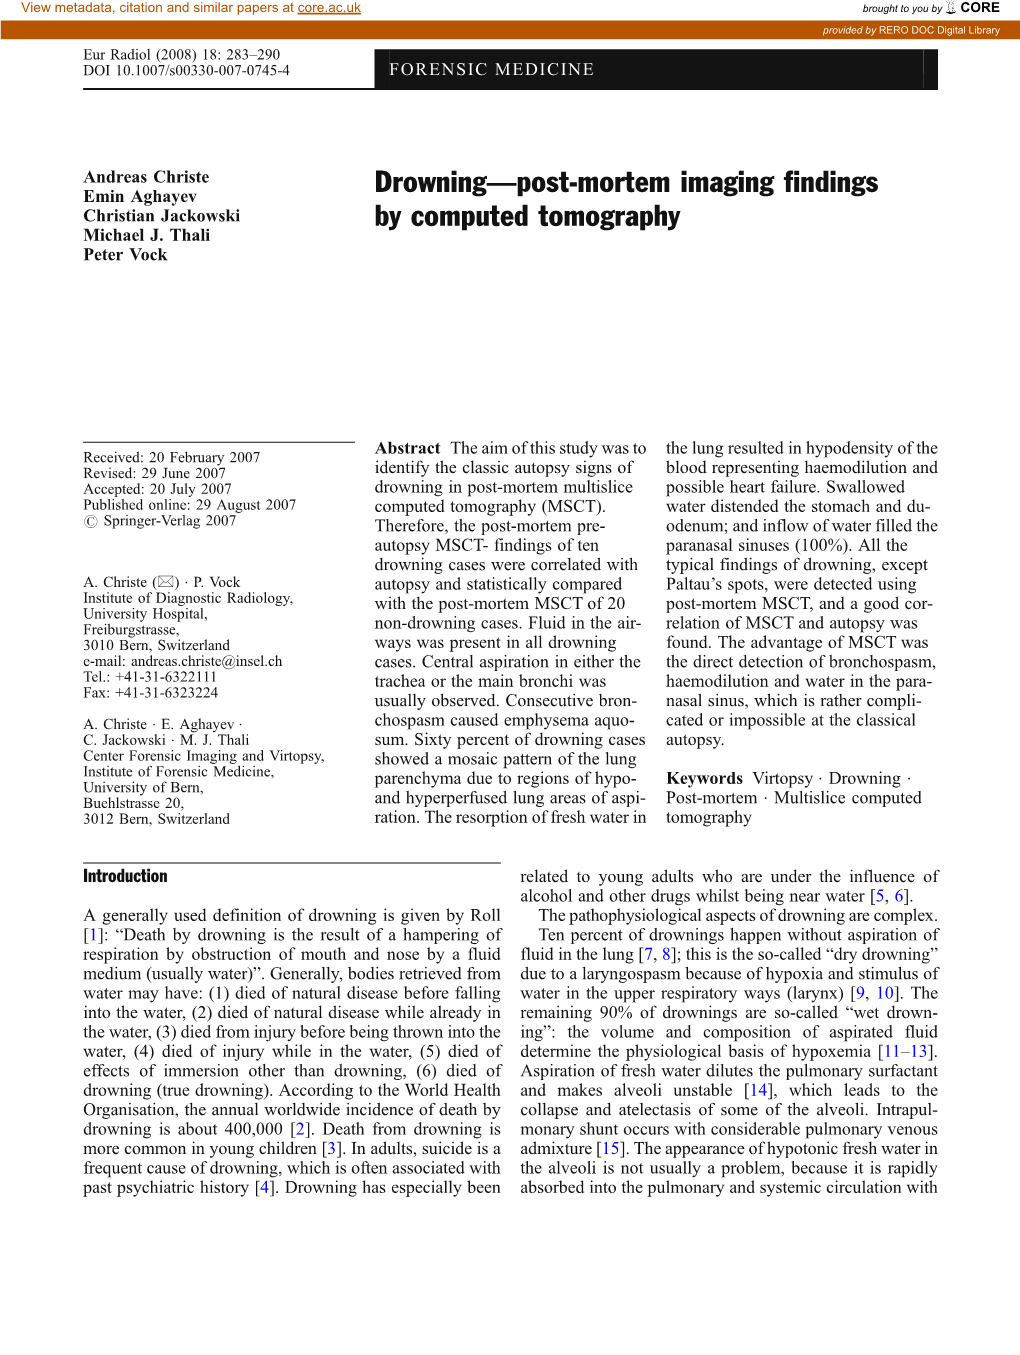 Drowning—Post-Mortem Imaging Findings by Computed Tomography